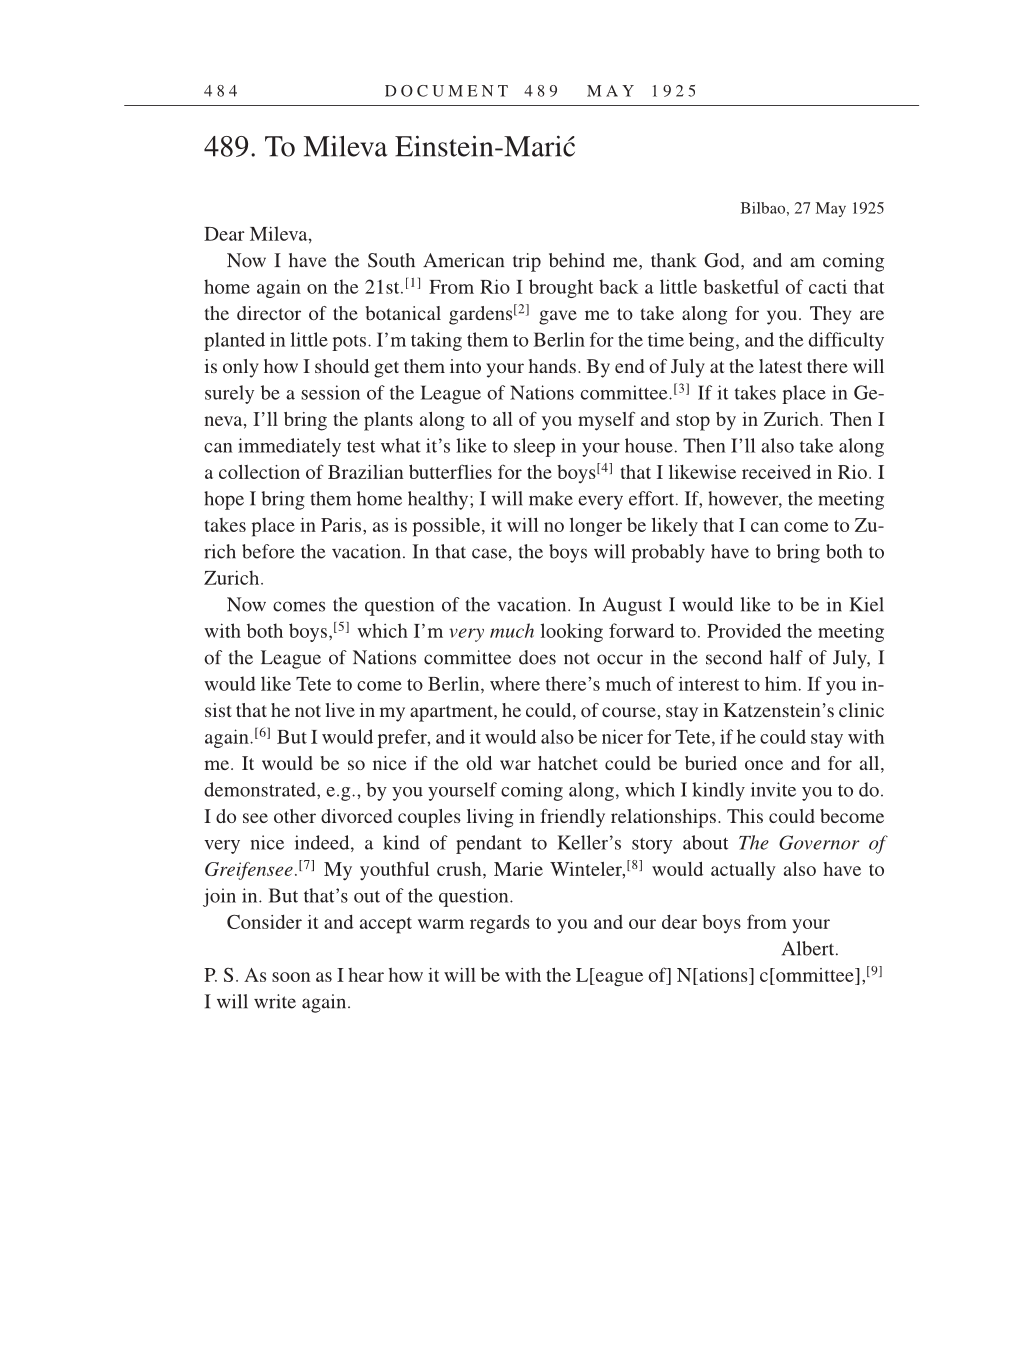 Volume 14: The Berlin Years: Writings & Correspondence, April 1923-May 1925 (English Translation Supplement) page 484